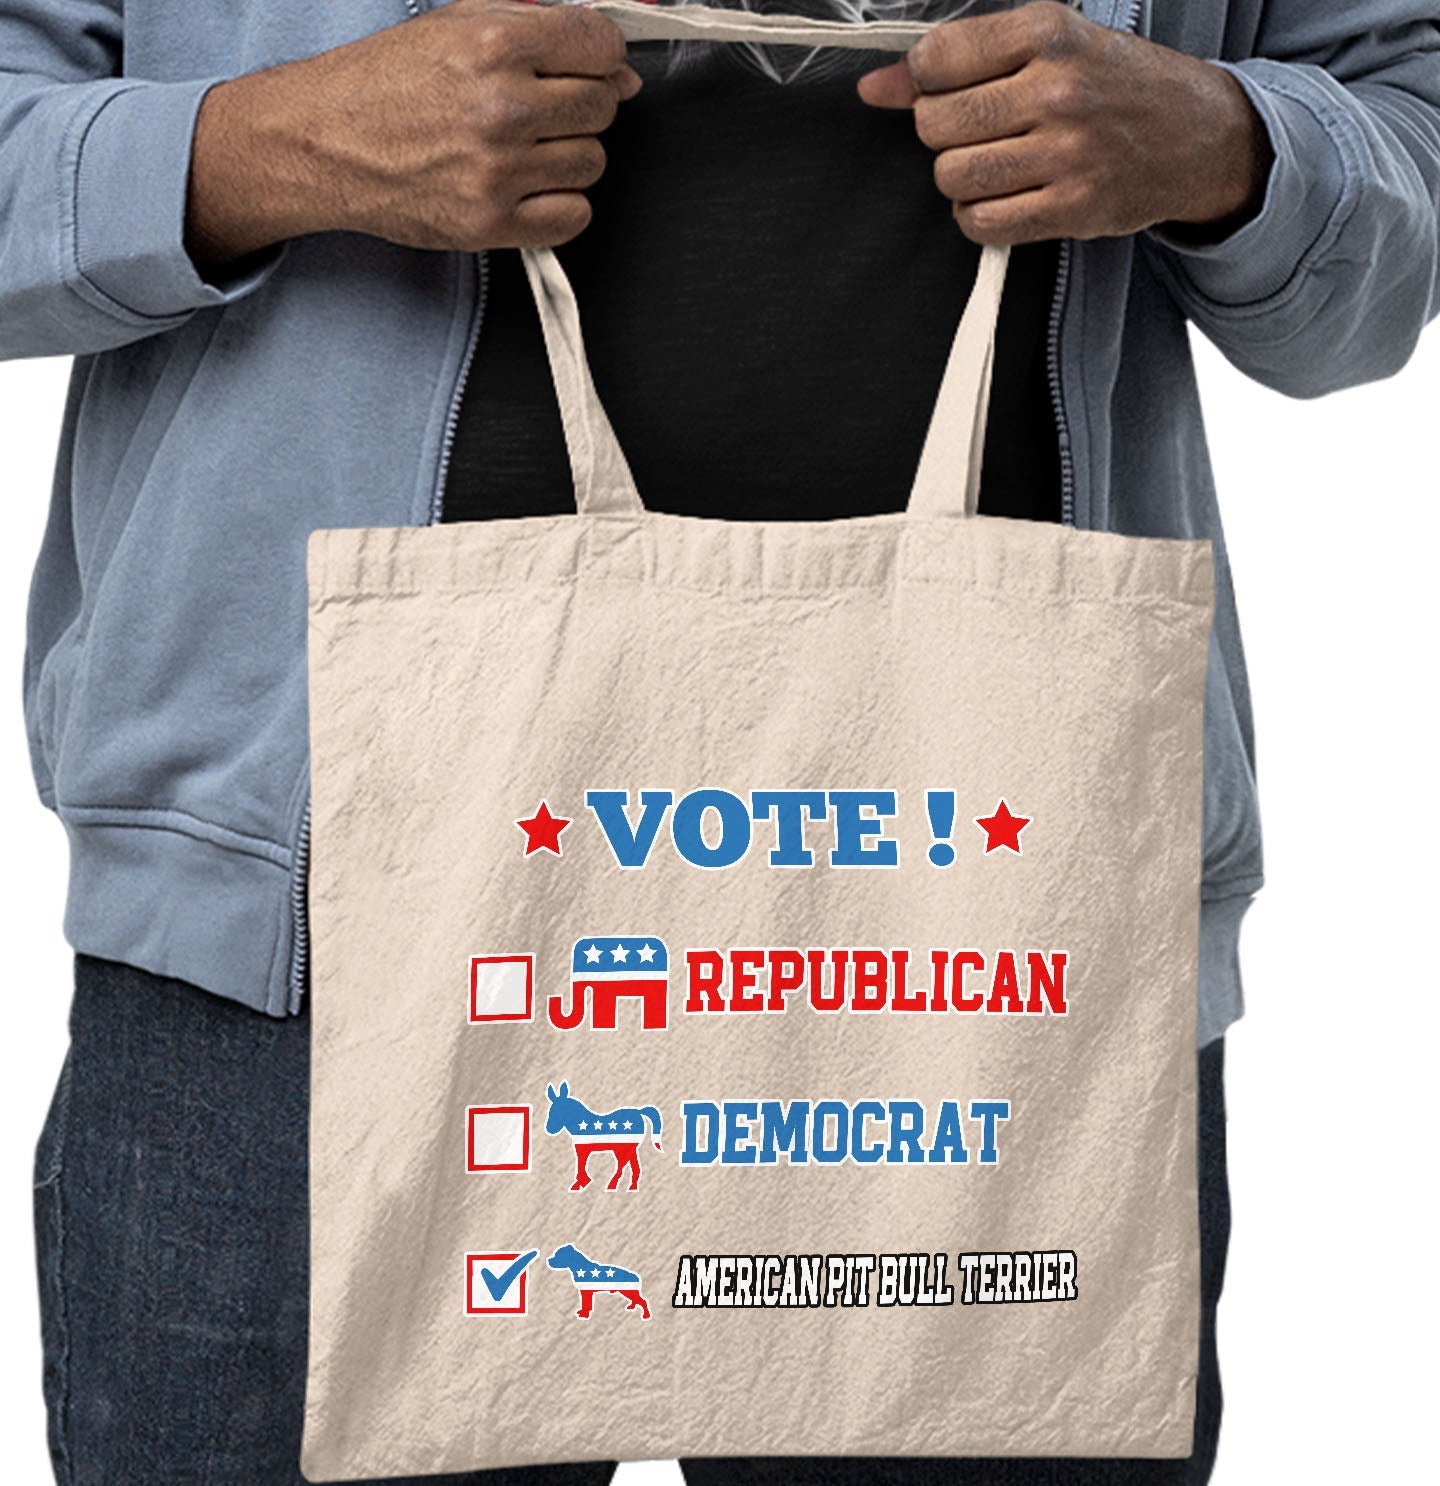 Vote for the American Pit Bull Terrier - Cotton Canvas Tote